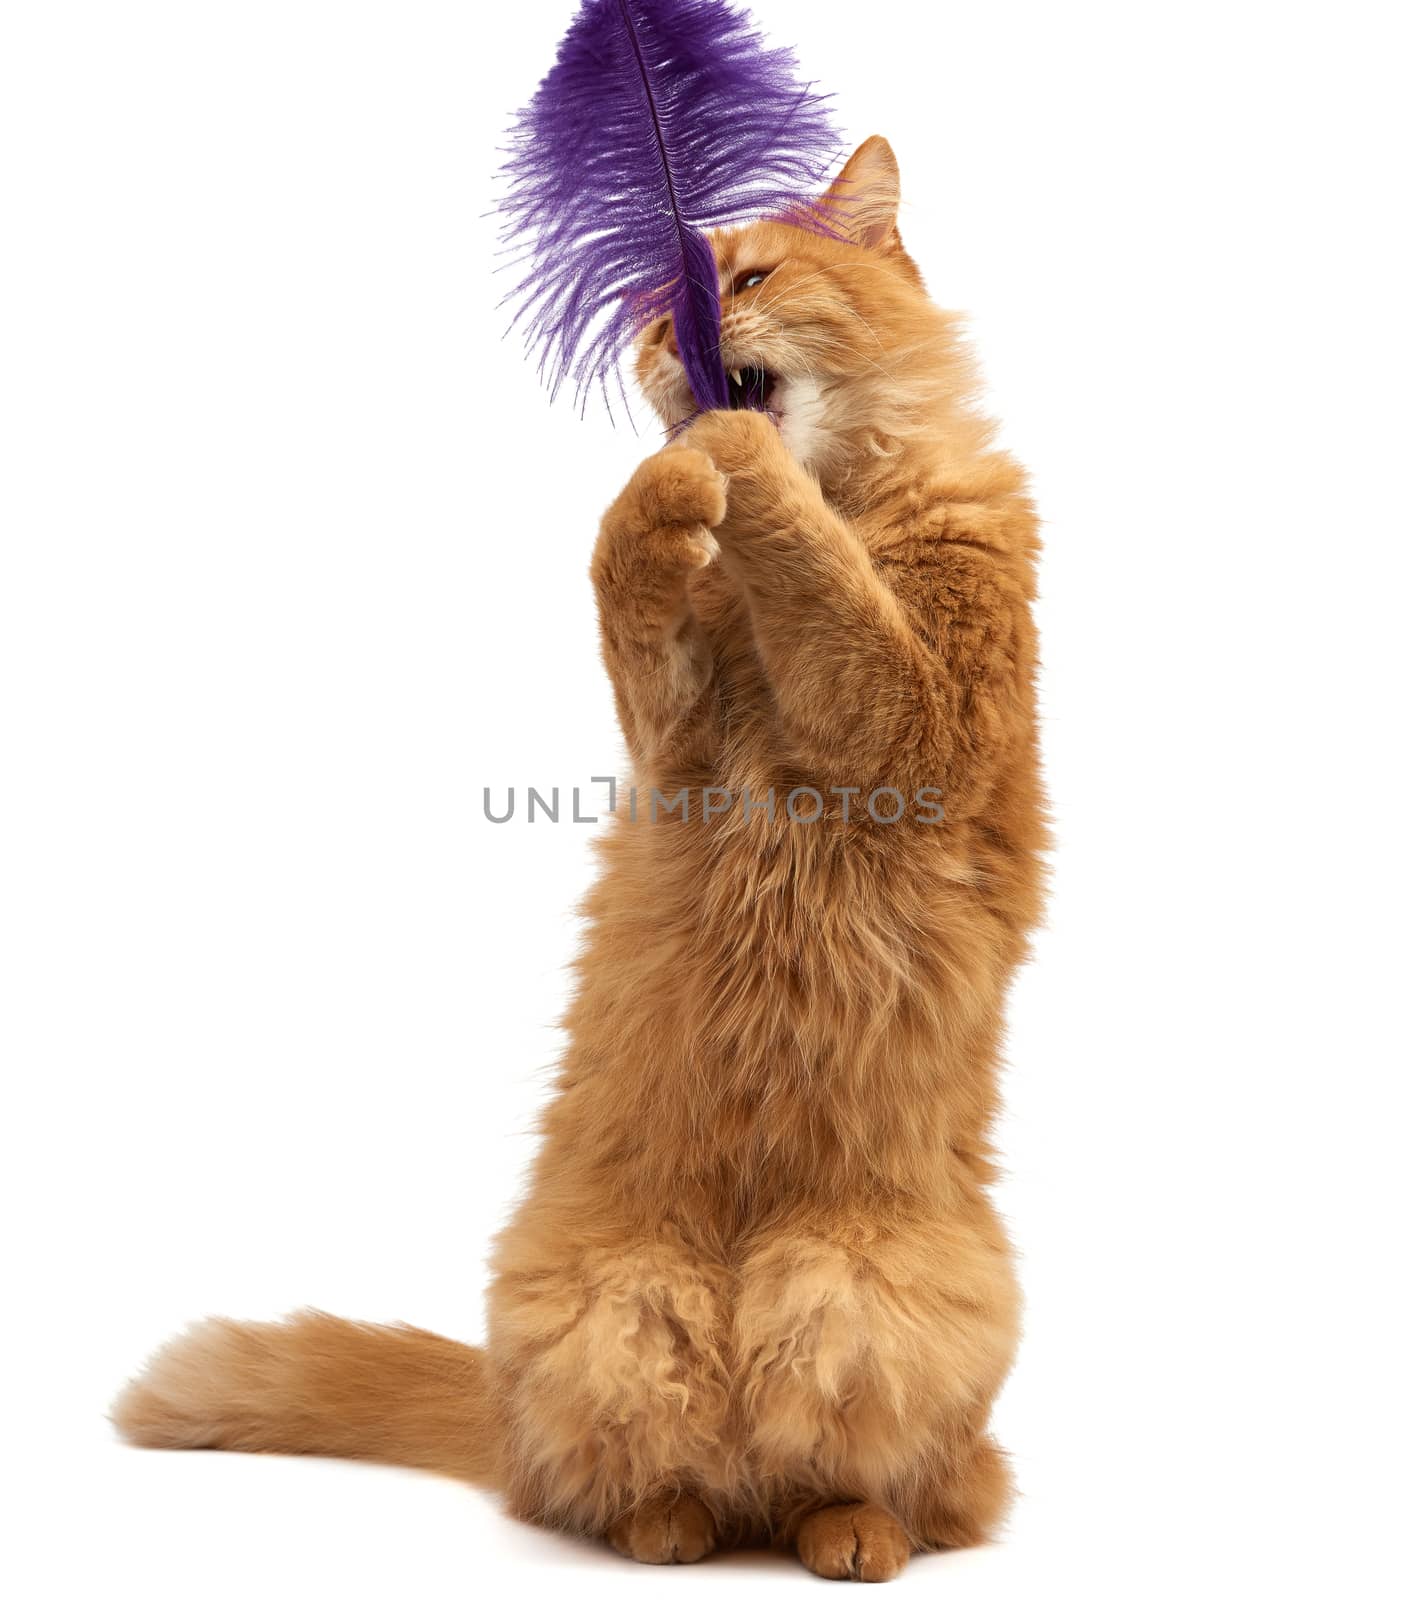 adult ginger fluffy cat plays with a purple feather on a white b by ndanko